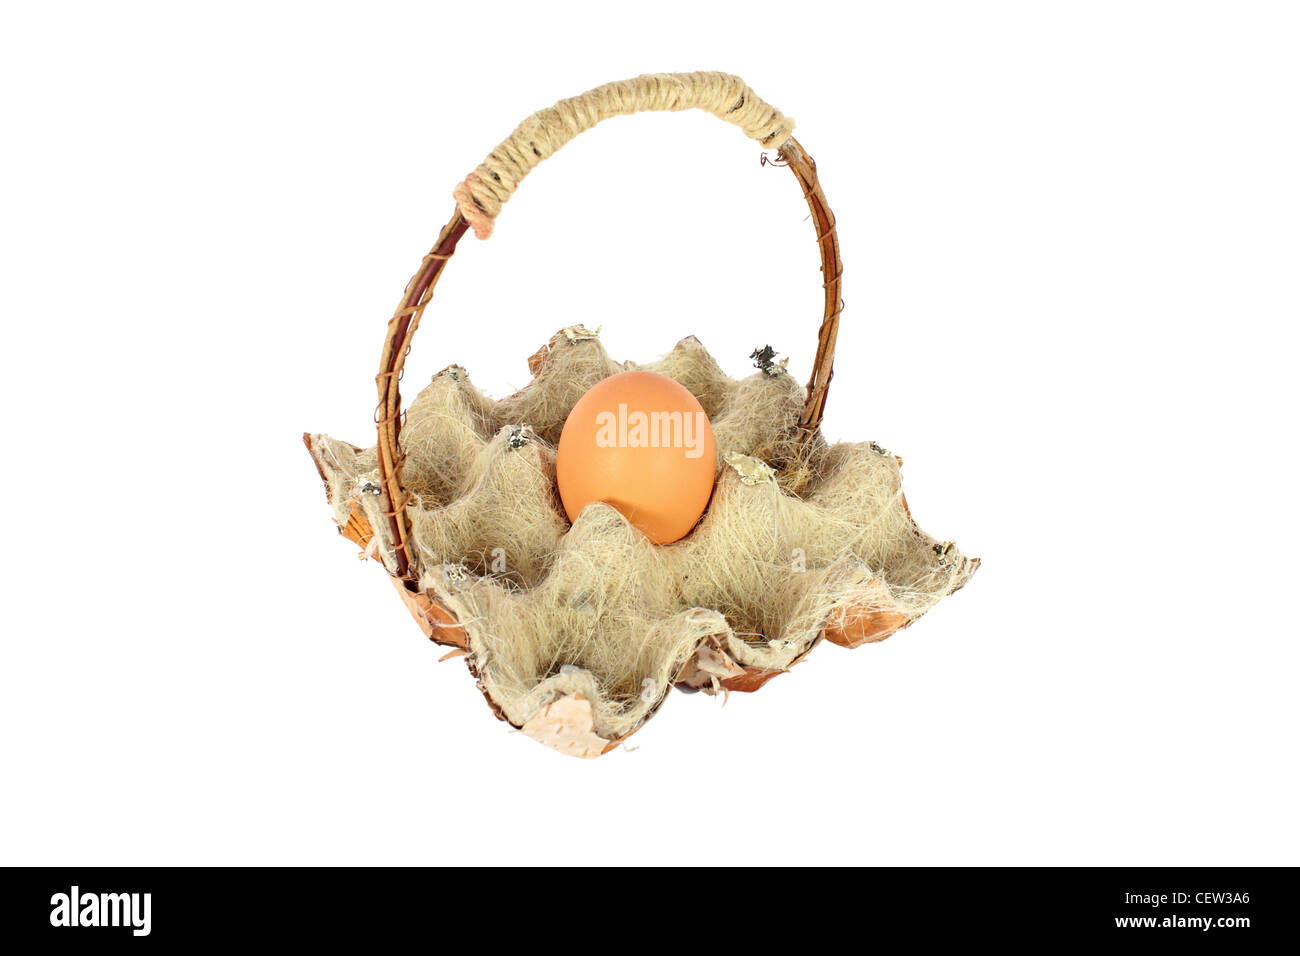 Chicken egg in a basket made of natural materials, isolated Stock Photo